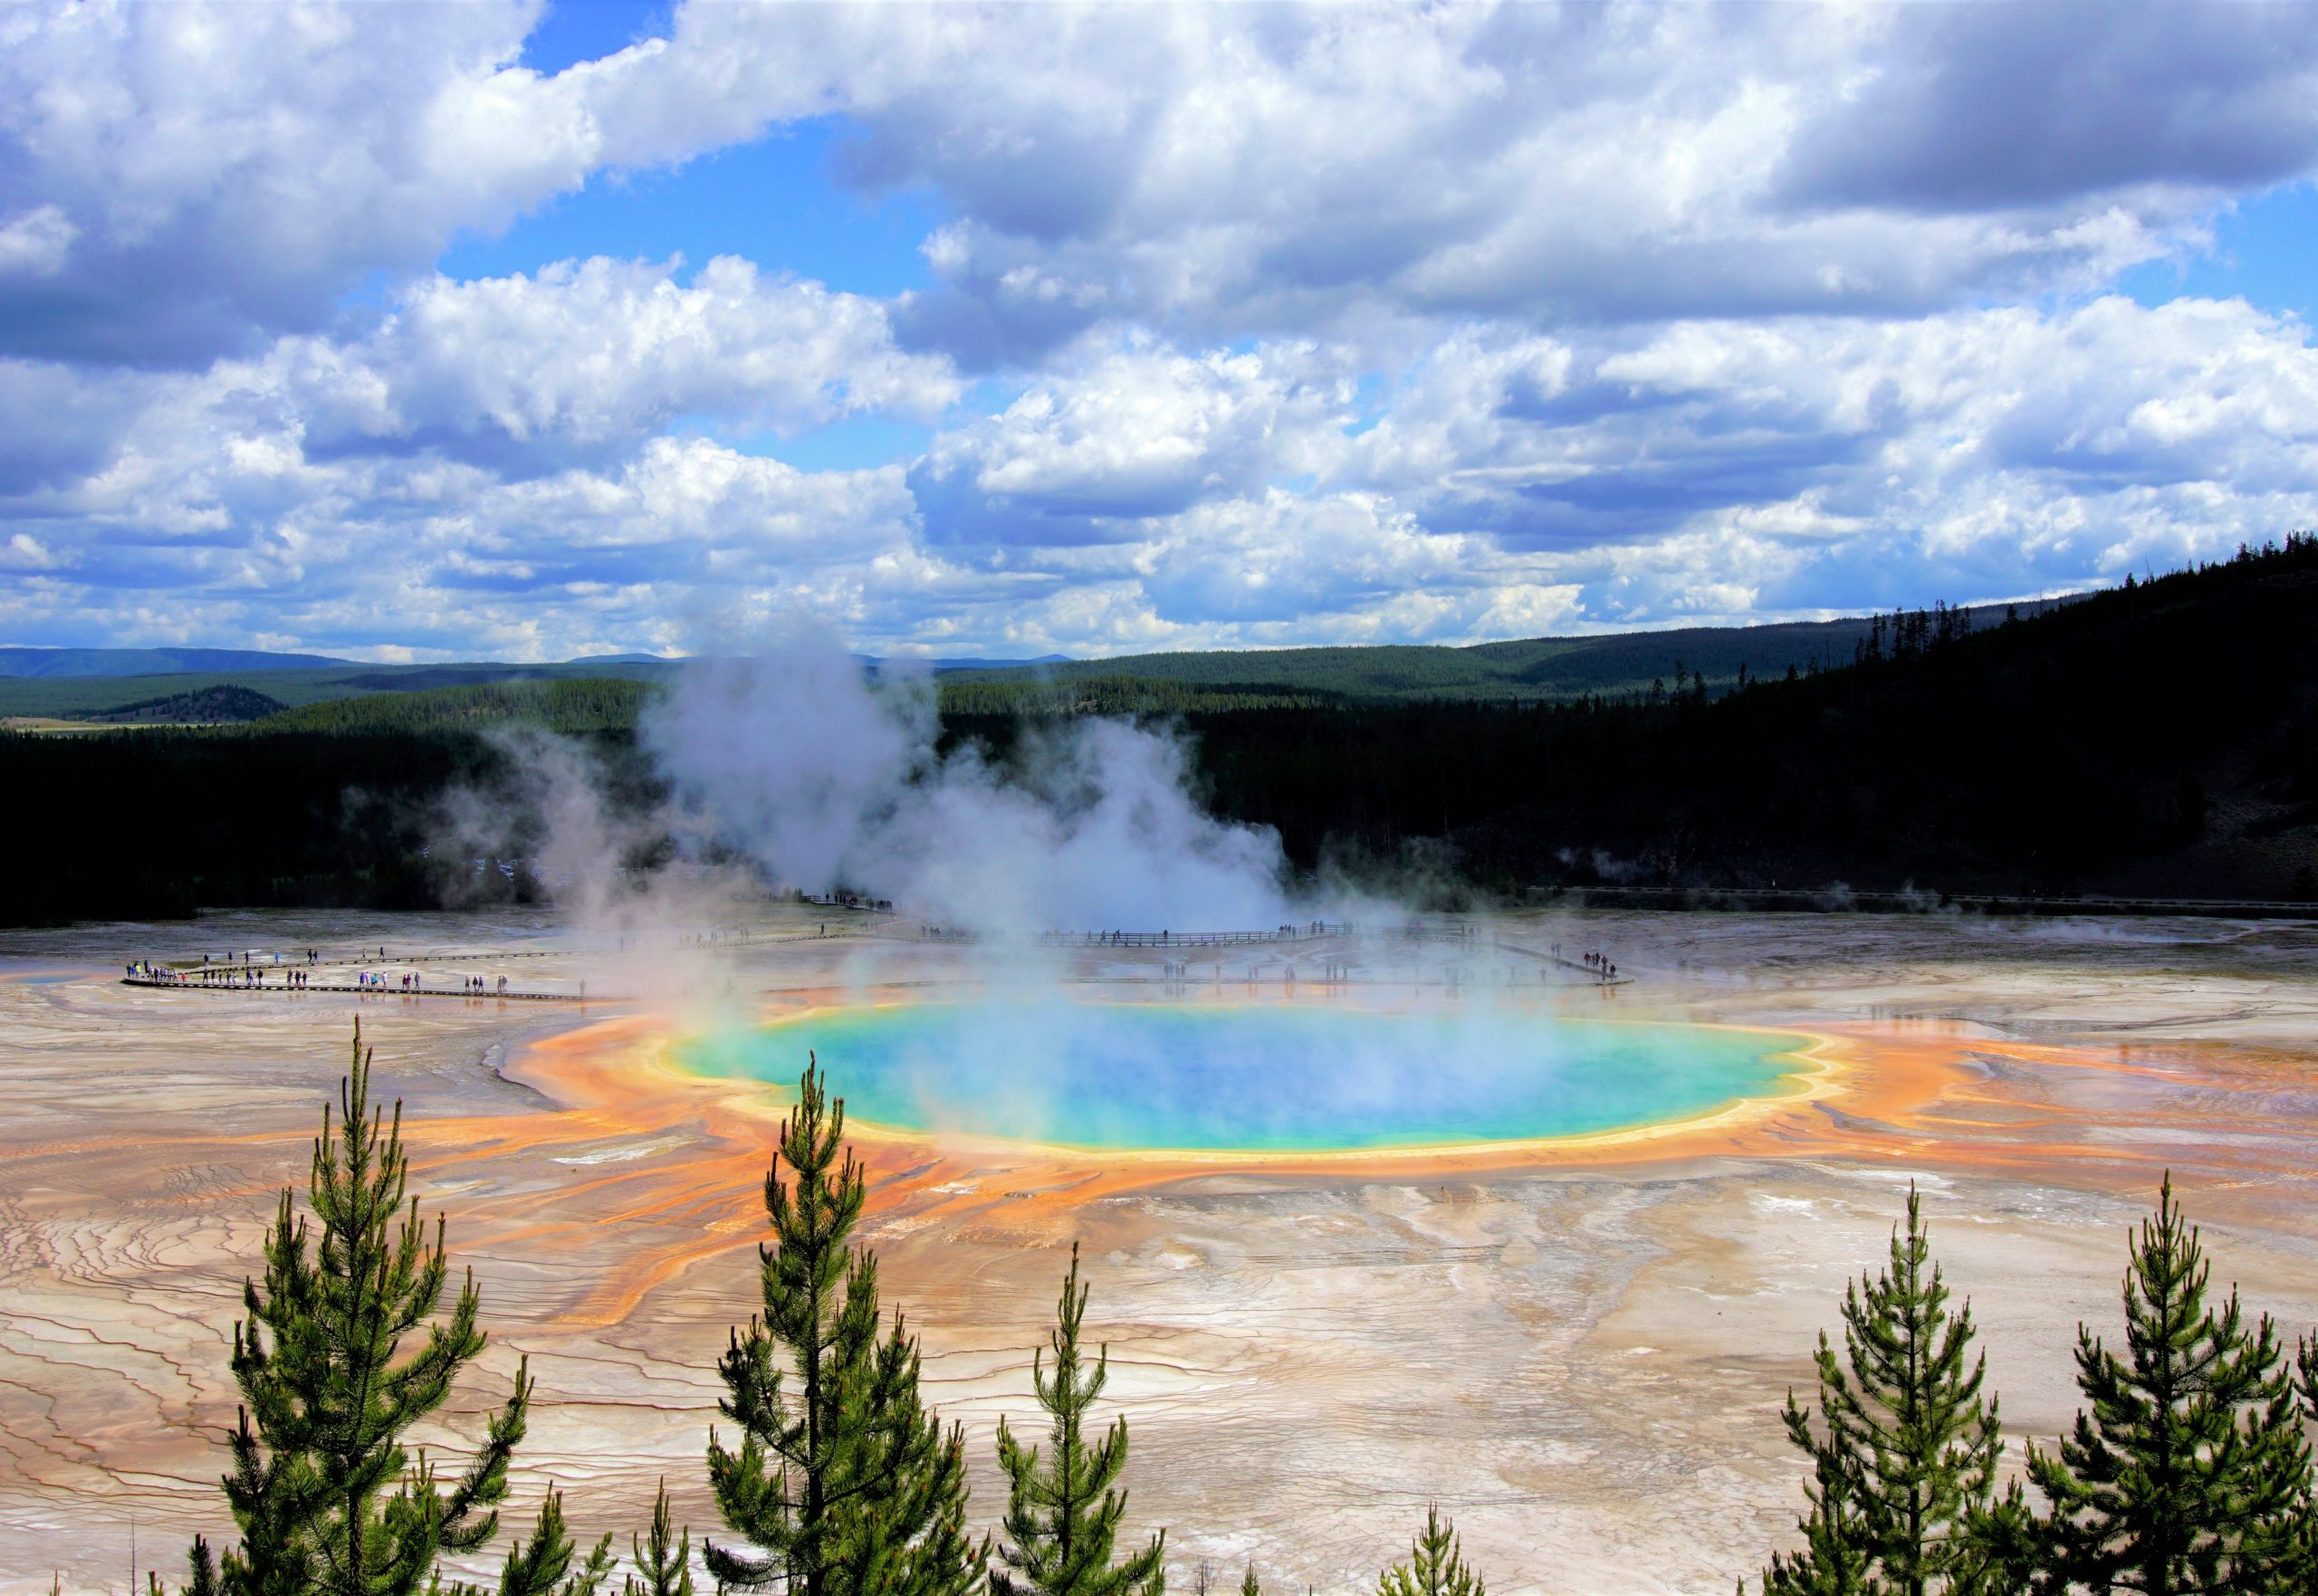 Woman jailed for walking on thermal area in Yellowstone National Park